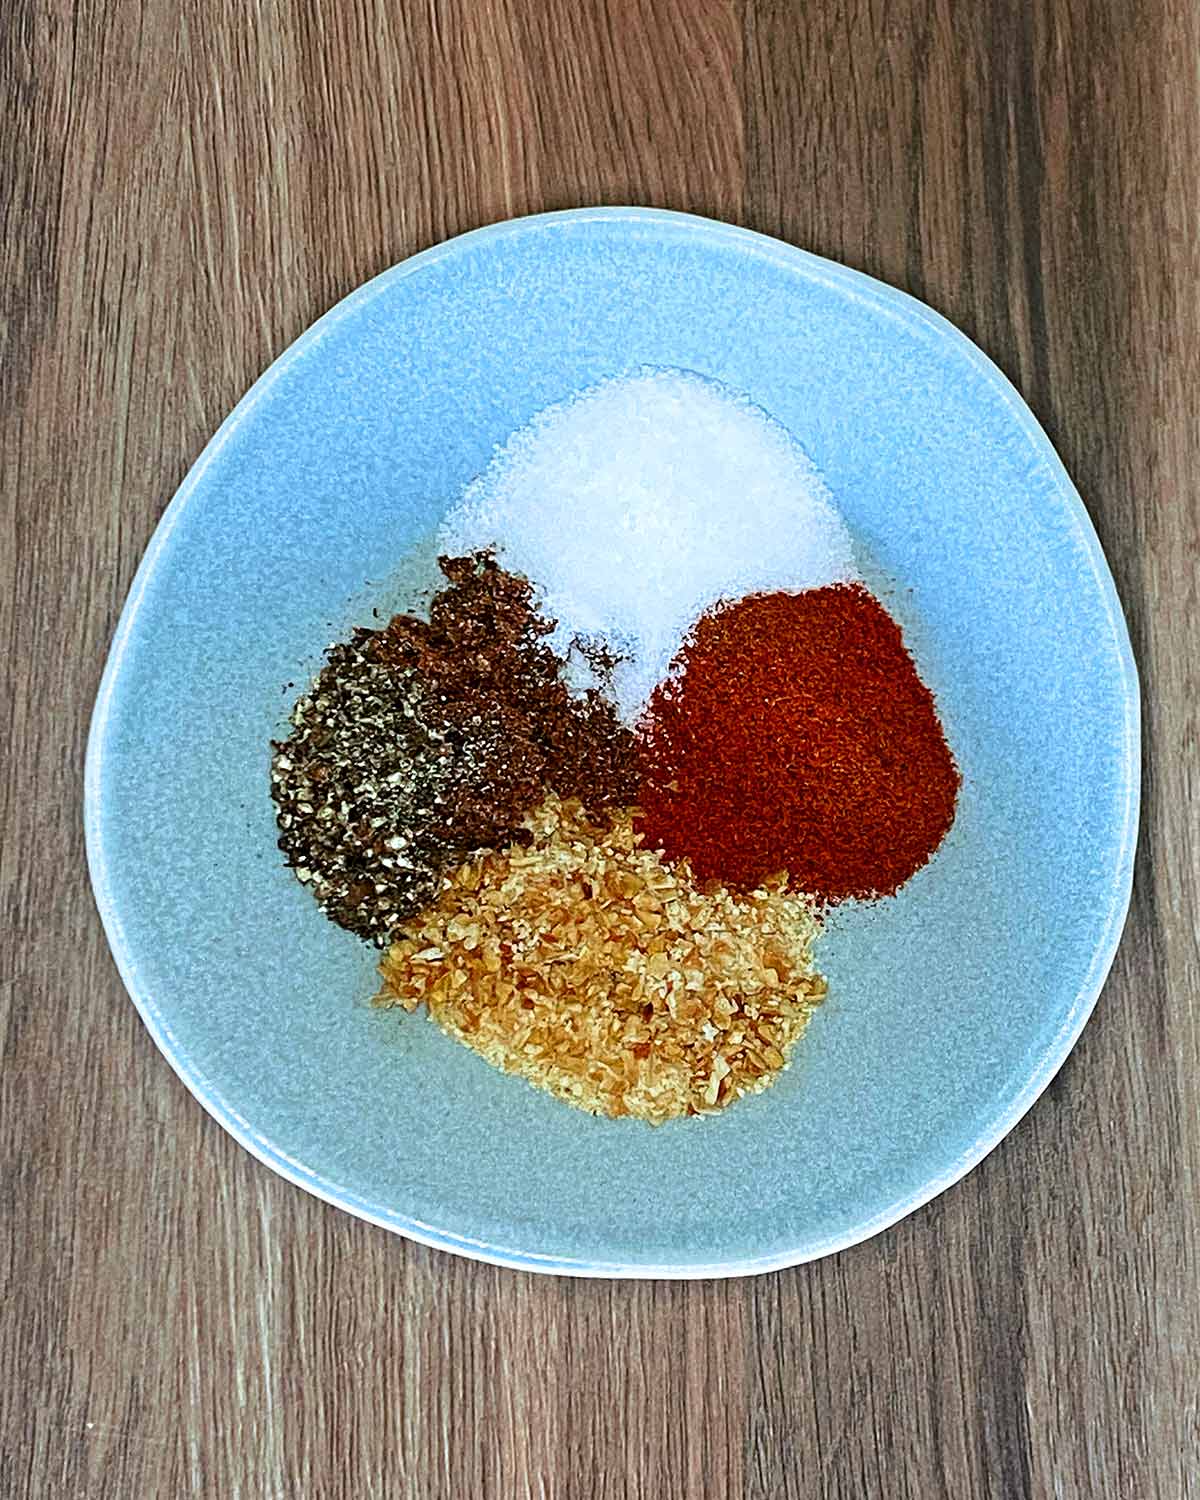 A bowl containing various spices and seasonings.